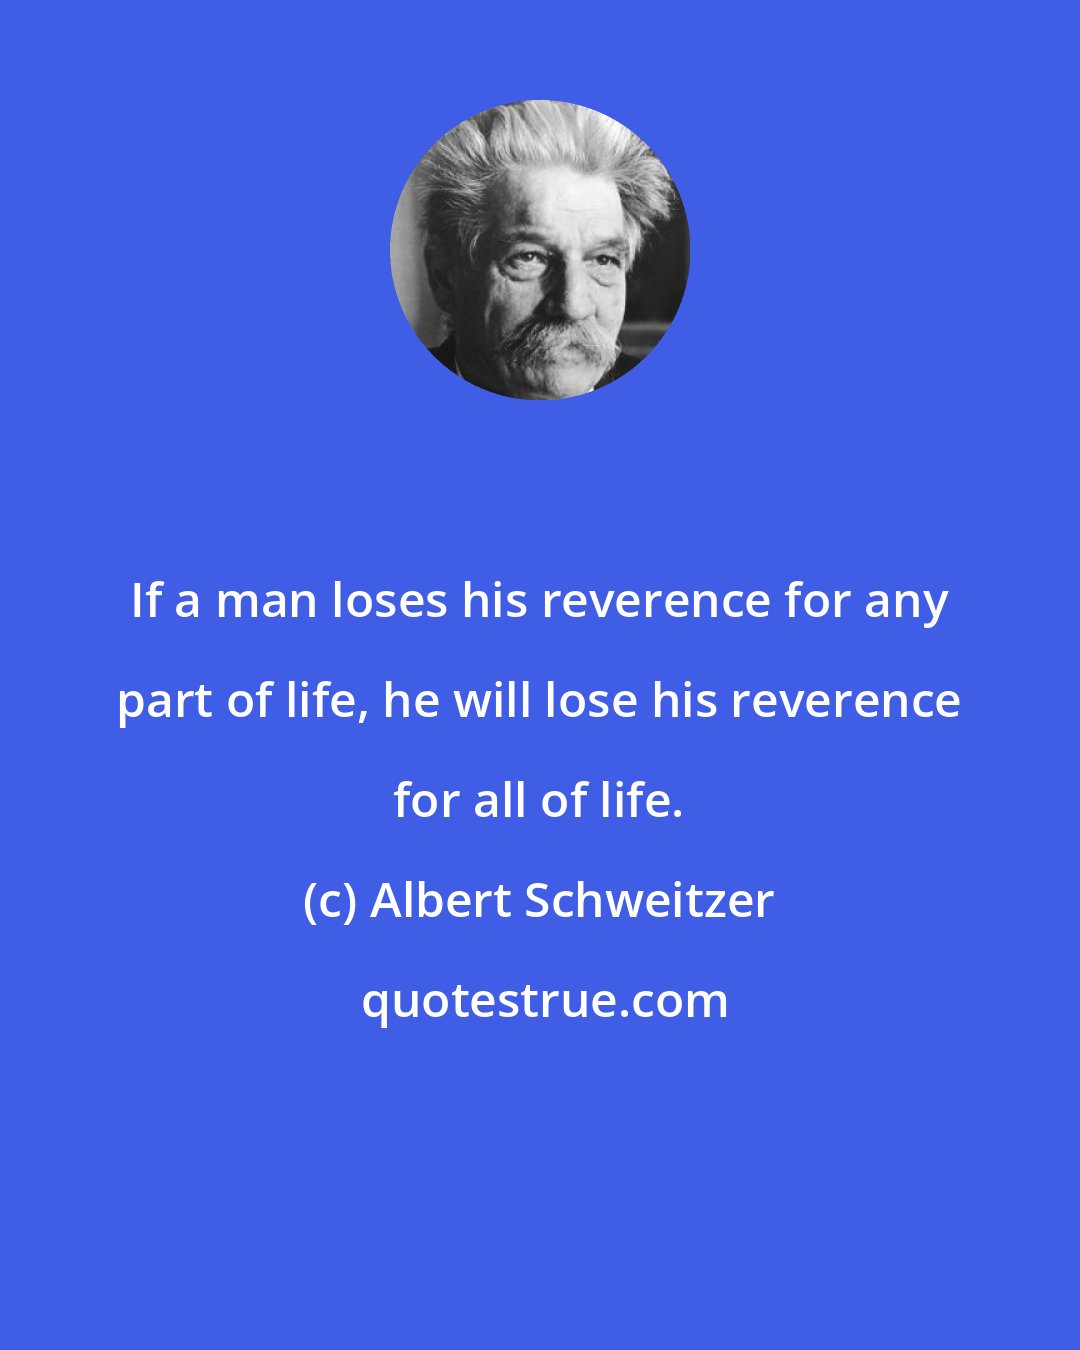 Albert Schweitzer: If a man loses his reverence for any part of life, he will lose his reverence for all of life.